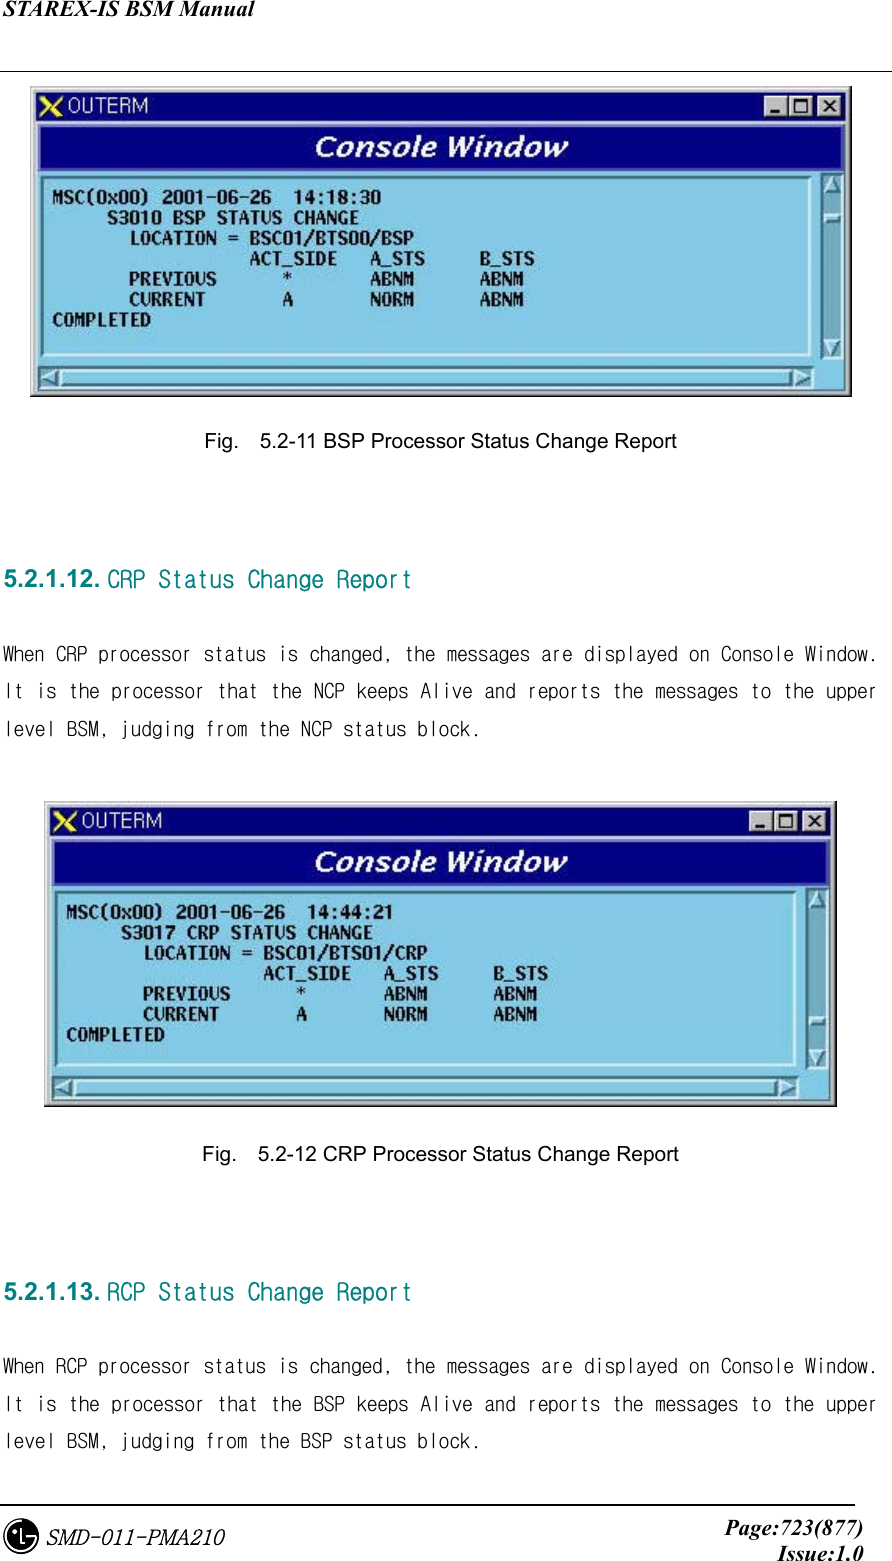 STAREX-IS BSM Manual     Page:723(877)Issue:1.0SMD-011-PMA210  Fig.    5.2-11 BSP Processor Status Change Report   5.2.1.12. CRP Status Change Report  When CRP processor status is changed, the messages are displayed on Console Window. It is the processor that the NCP keeps Alive and reports the messages to the upper level BSM, judging from the NCP status block.   Fig.    5.2-12 CRP Processor Status Change Report   5.2.1.13. RCP Status Change Report  When RCP processor status is changed, the messages are displayed on Console Window. It is the processor that the BSP keeps Alive and reports the messages to the upper level BSM, judging from the BSP status block. 